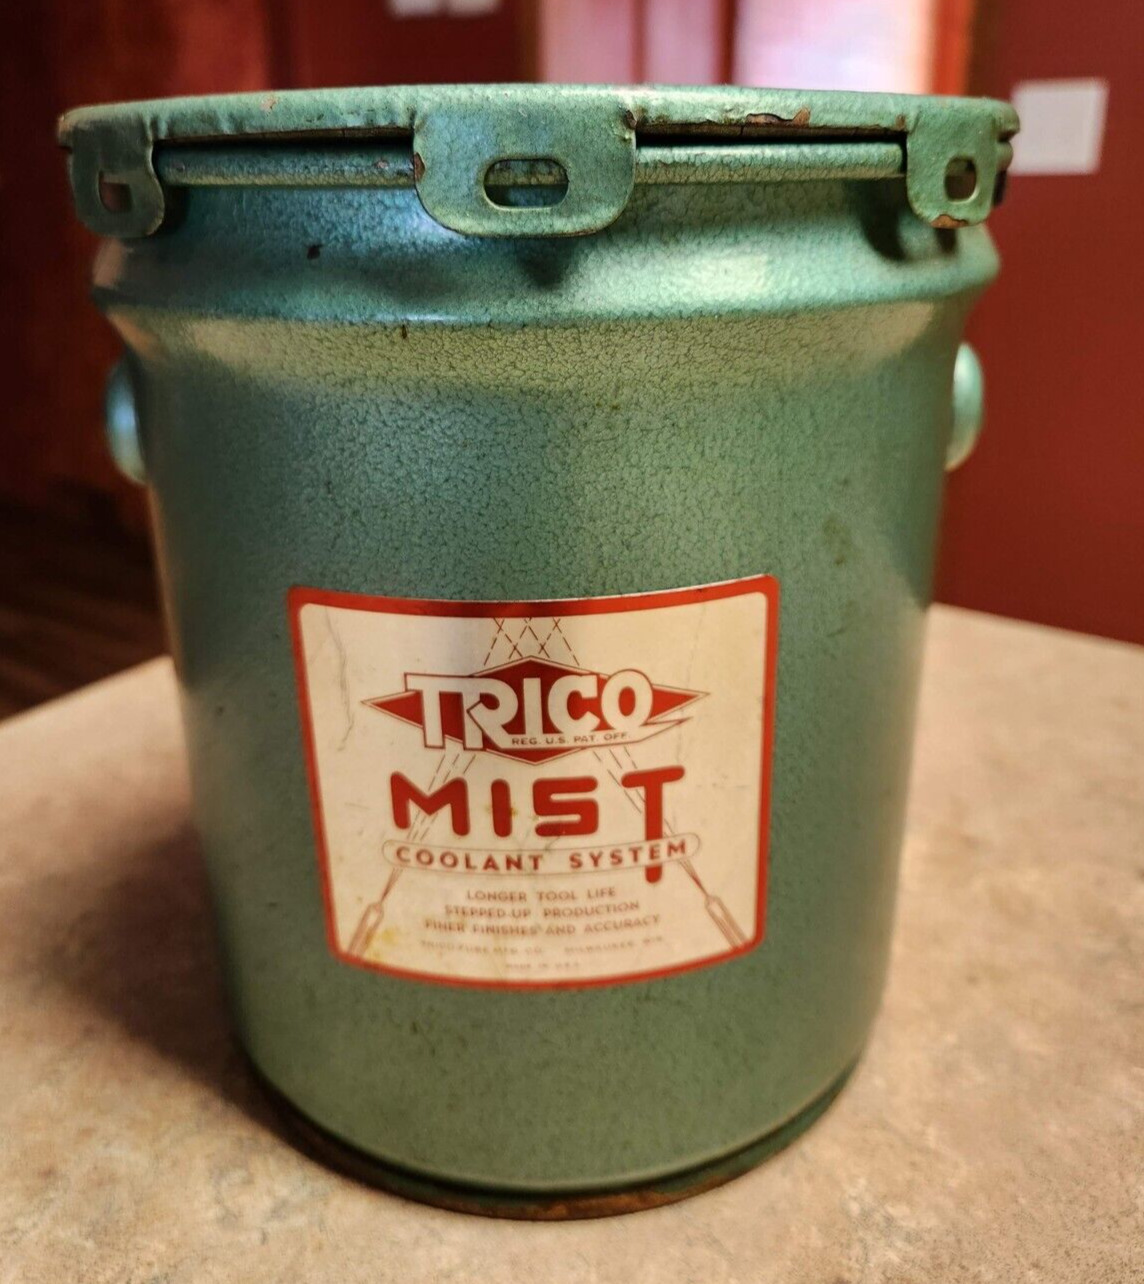 Vintage RARE Trico Mist Coolant System Bucket Pail NICE Graphics for Display